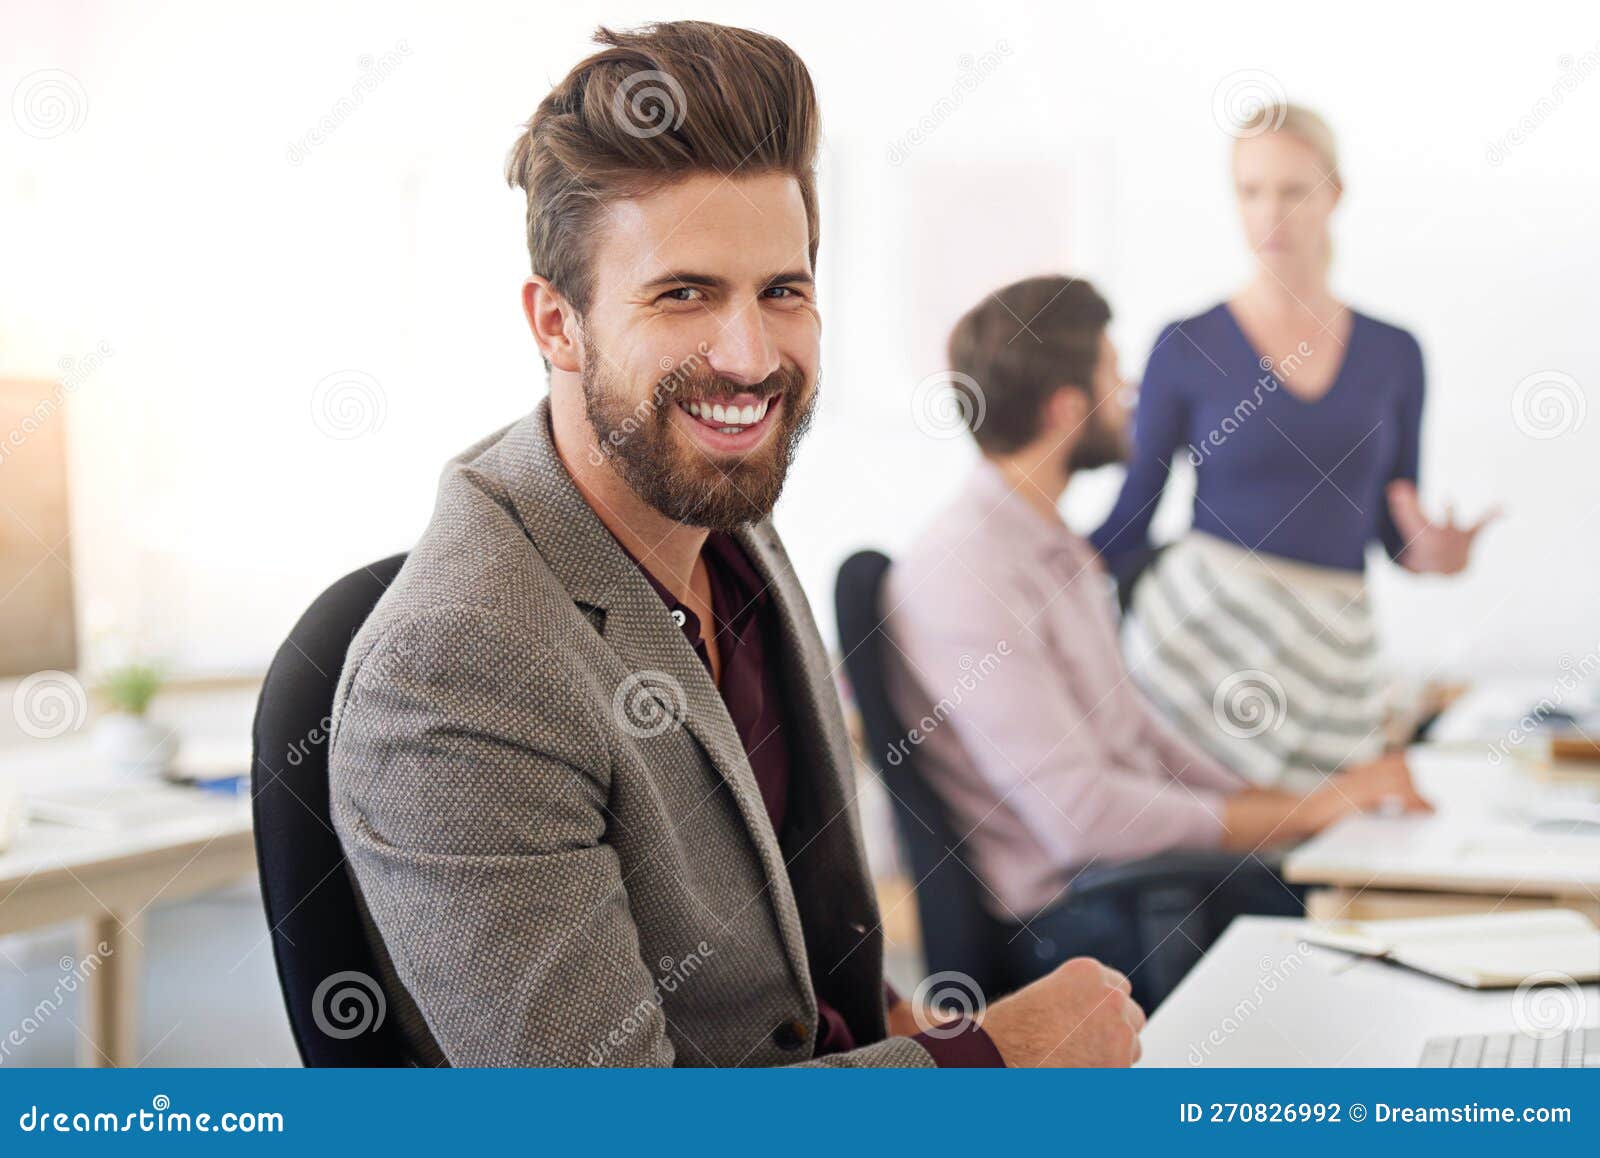 hes one confident exec. a businessman sitting at his desk with his coworkers in the background.